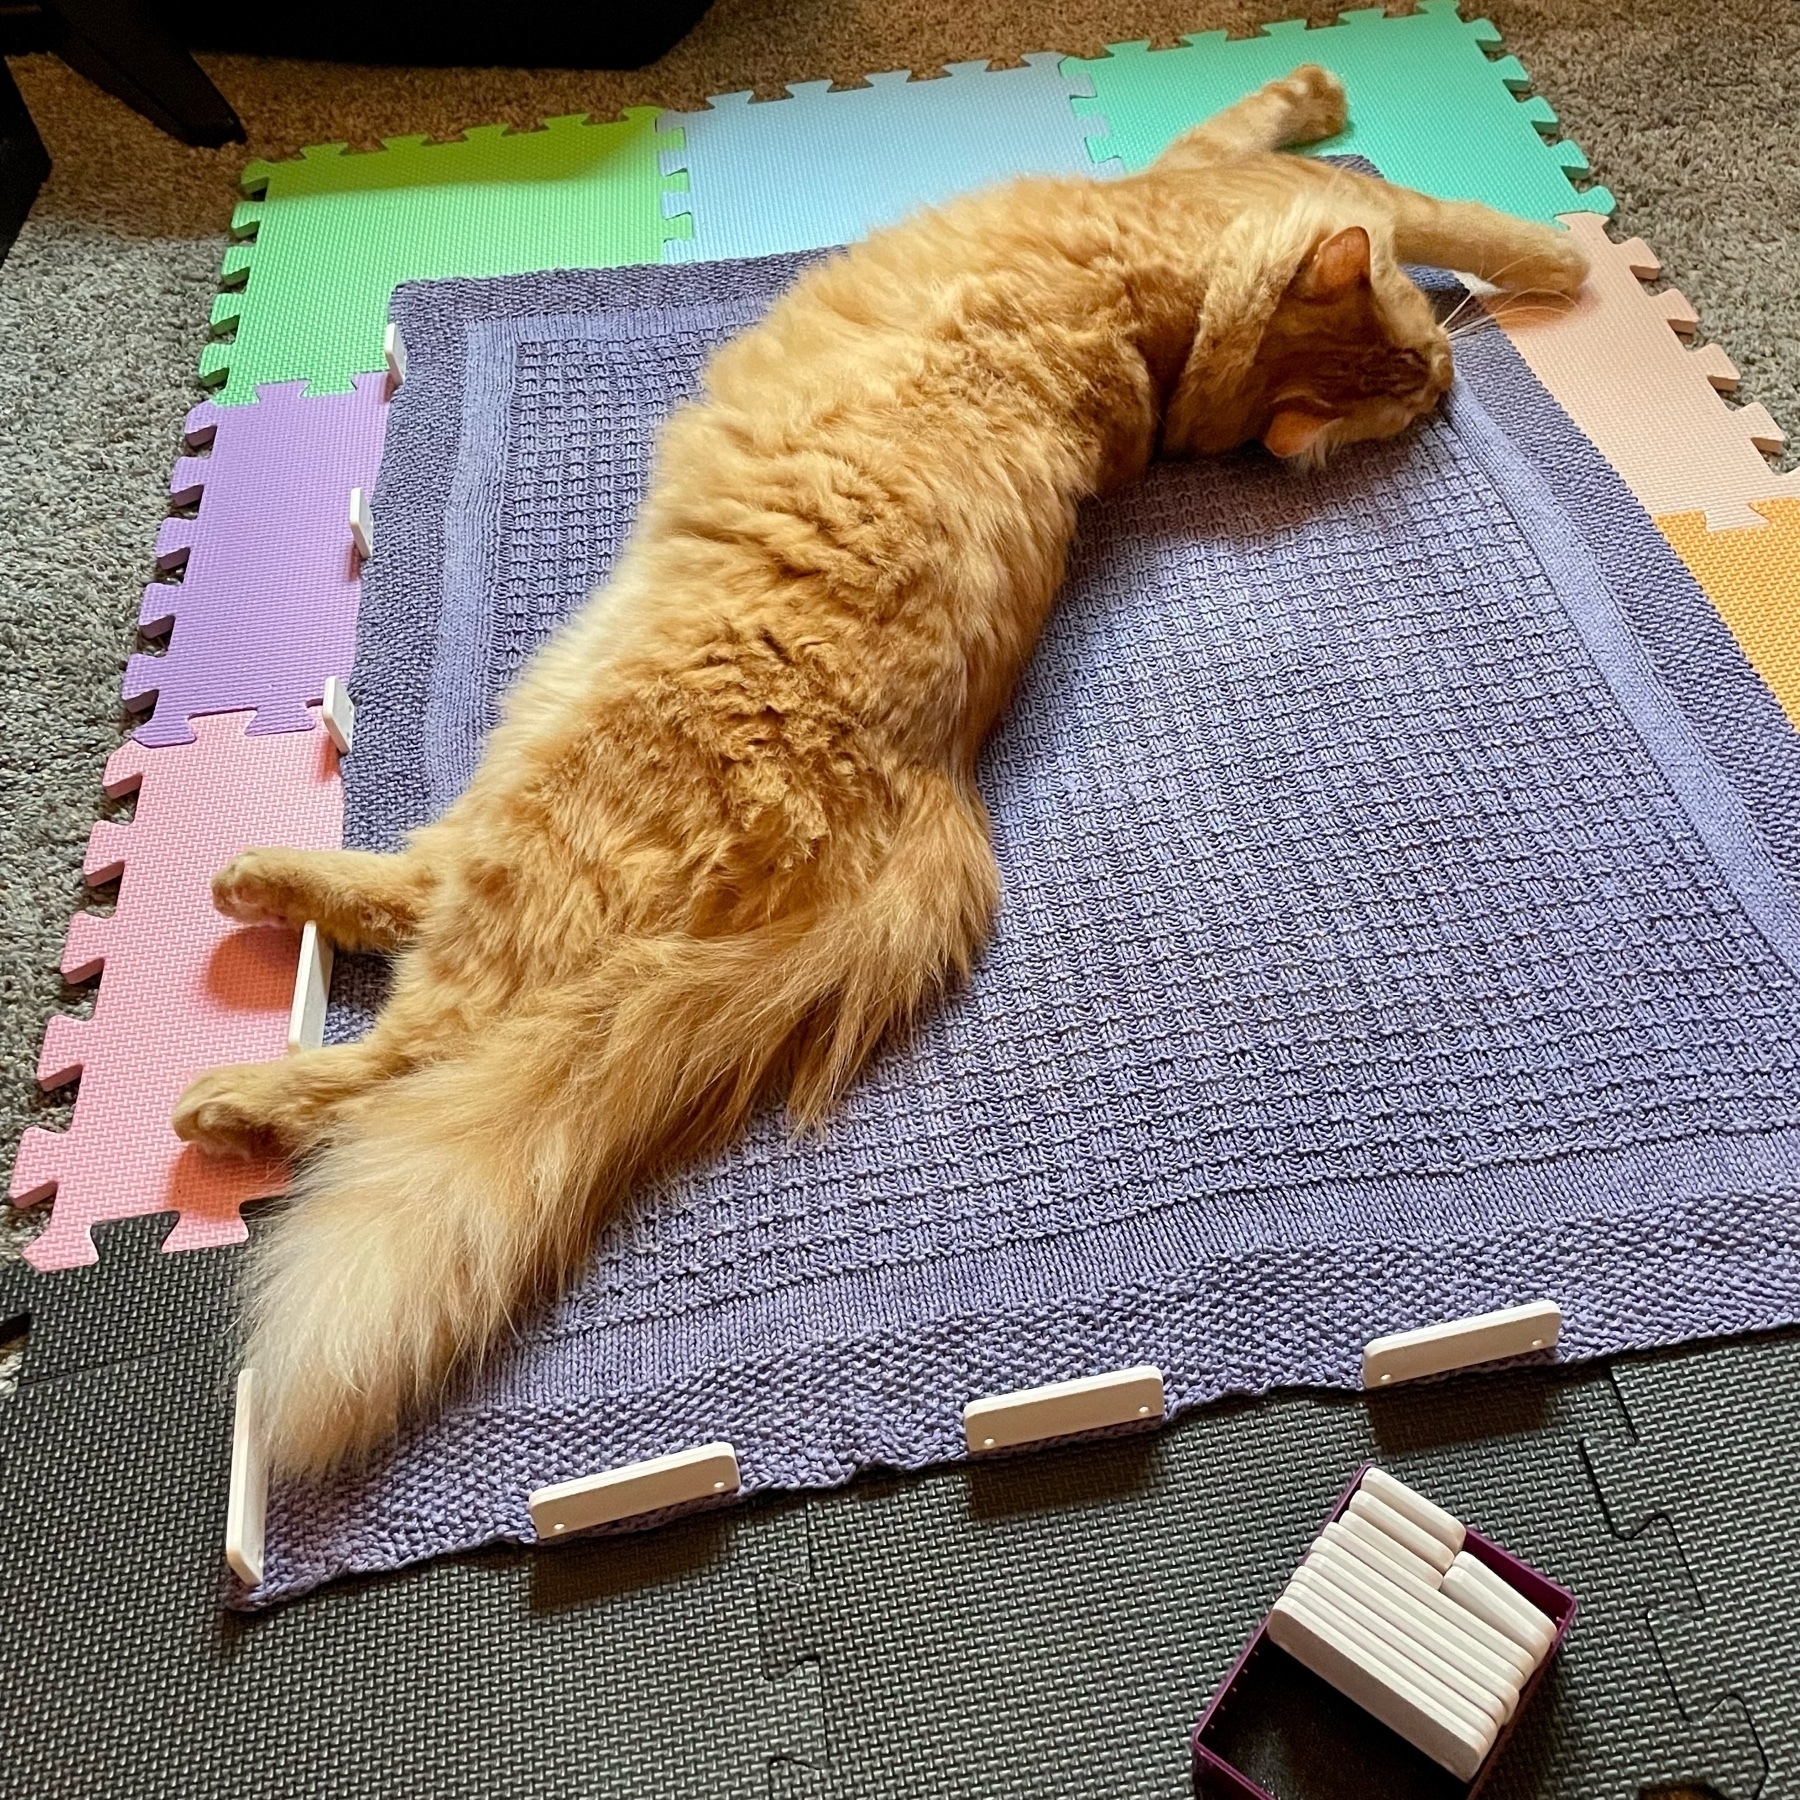 large orange cat stretched out on knitted blanket 